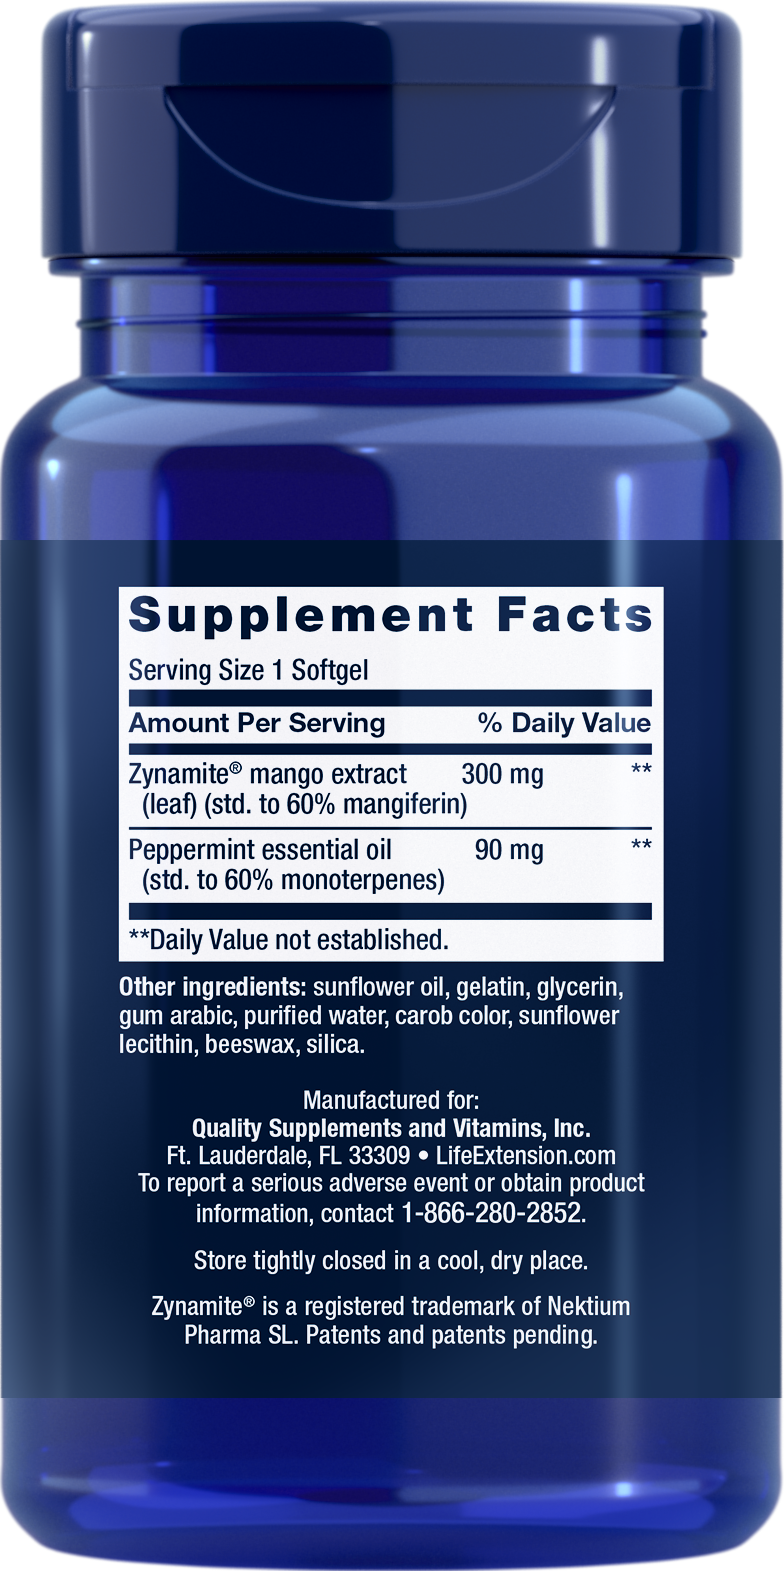 Life Extension Brain Fog Relief, 30 softgels to boost cognitive performance and restore mental focus, supplement facts.